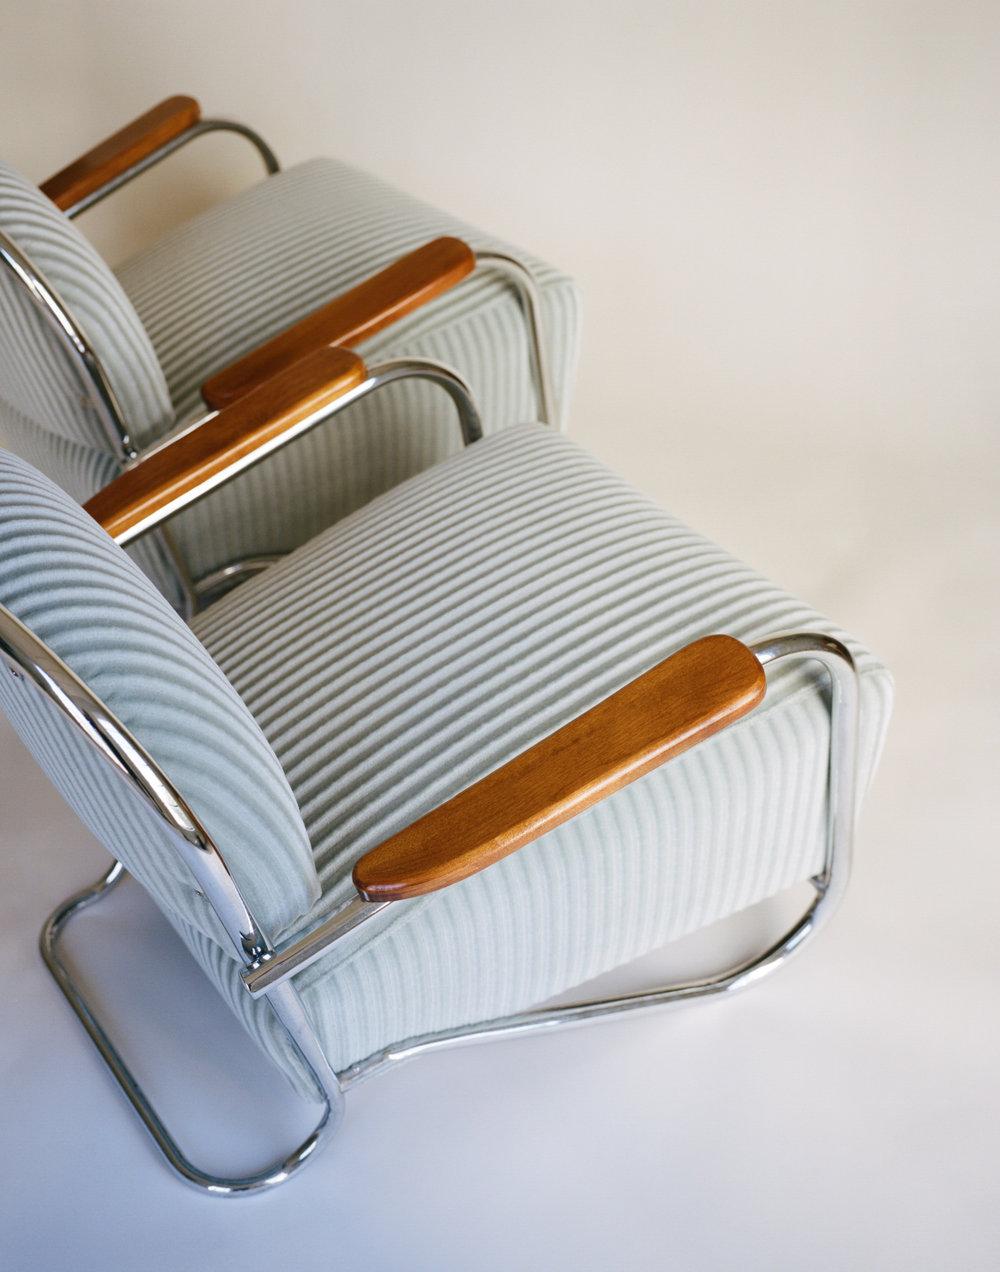 Streamlined Moderne K.E.M. Weber, Pair of Lounge Chairs, 1934